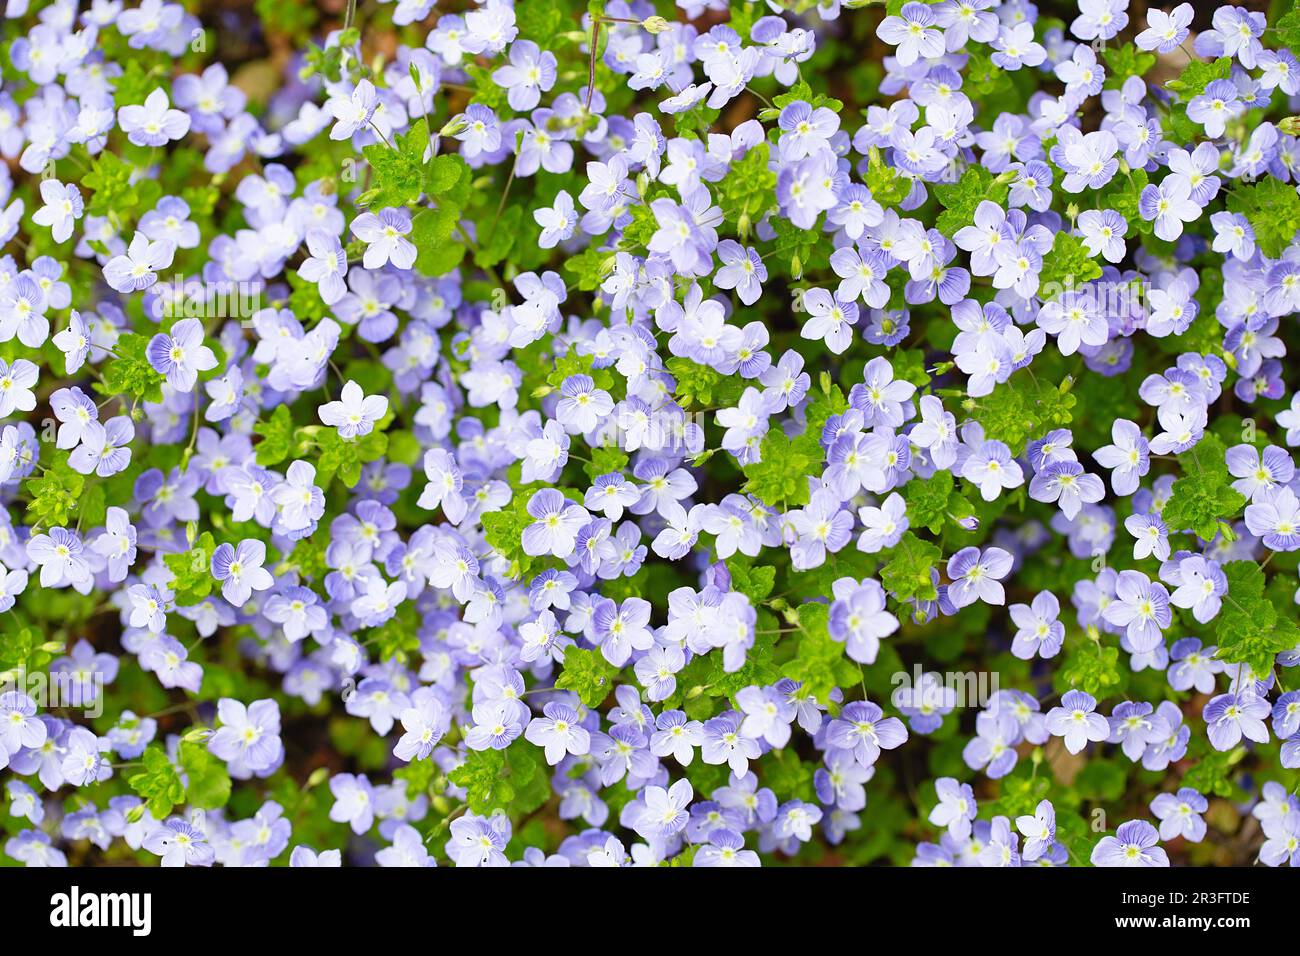 Small purple flowers with green leaves. internet springtime banner. floral background. Stock Photo